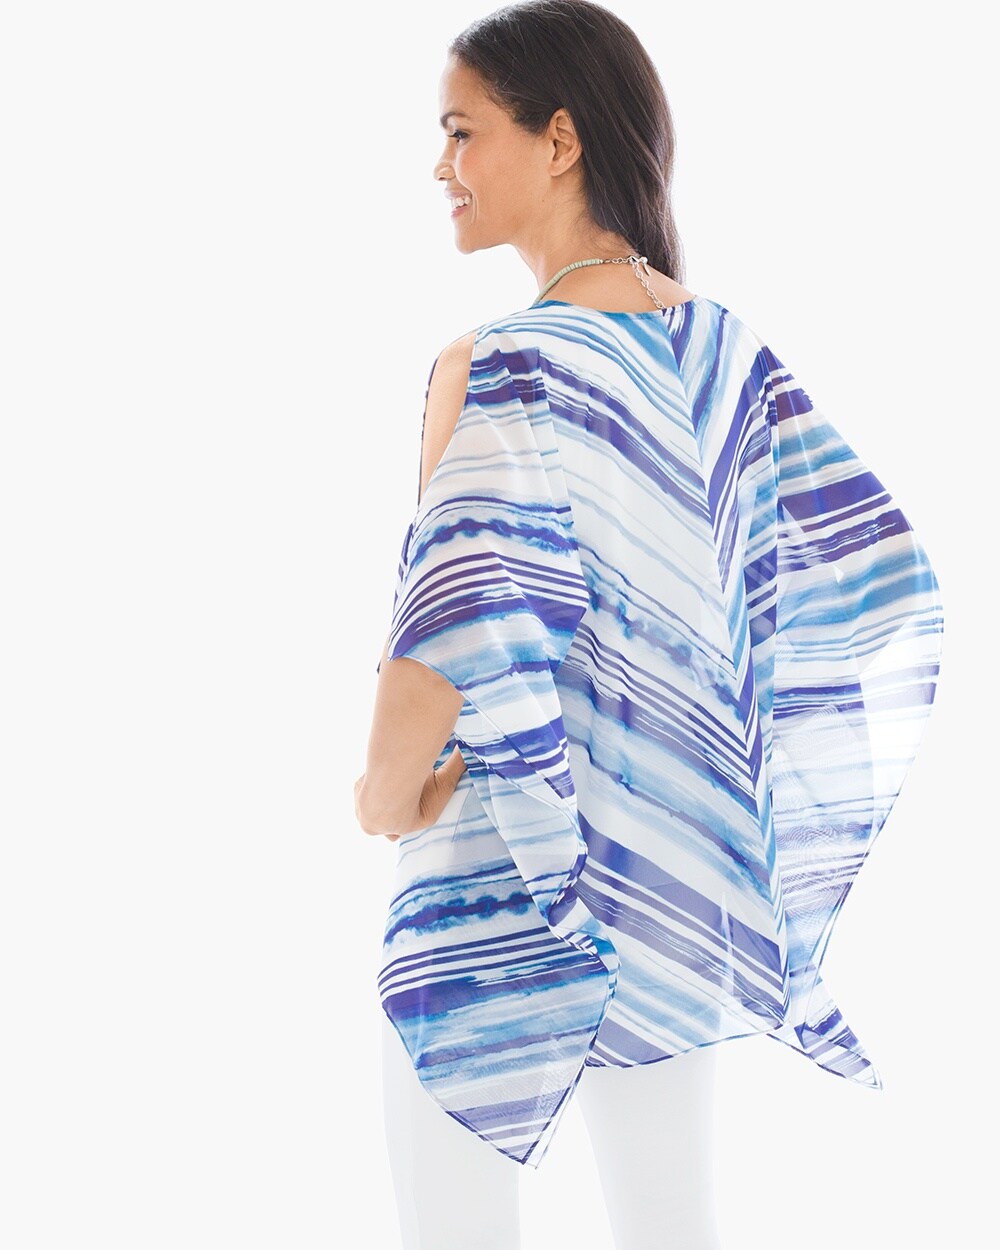 CHICO'S $99 NEW BLUE STRIPE SHEER SHORT PONCHO CAFTAN TOP BLOUSE SIZE 1 M 